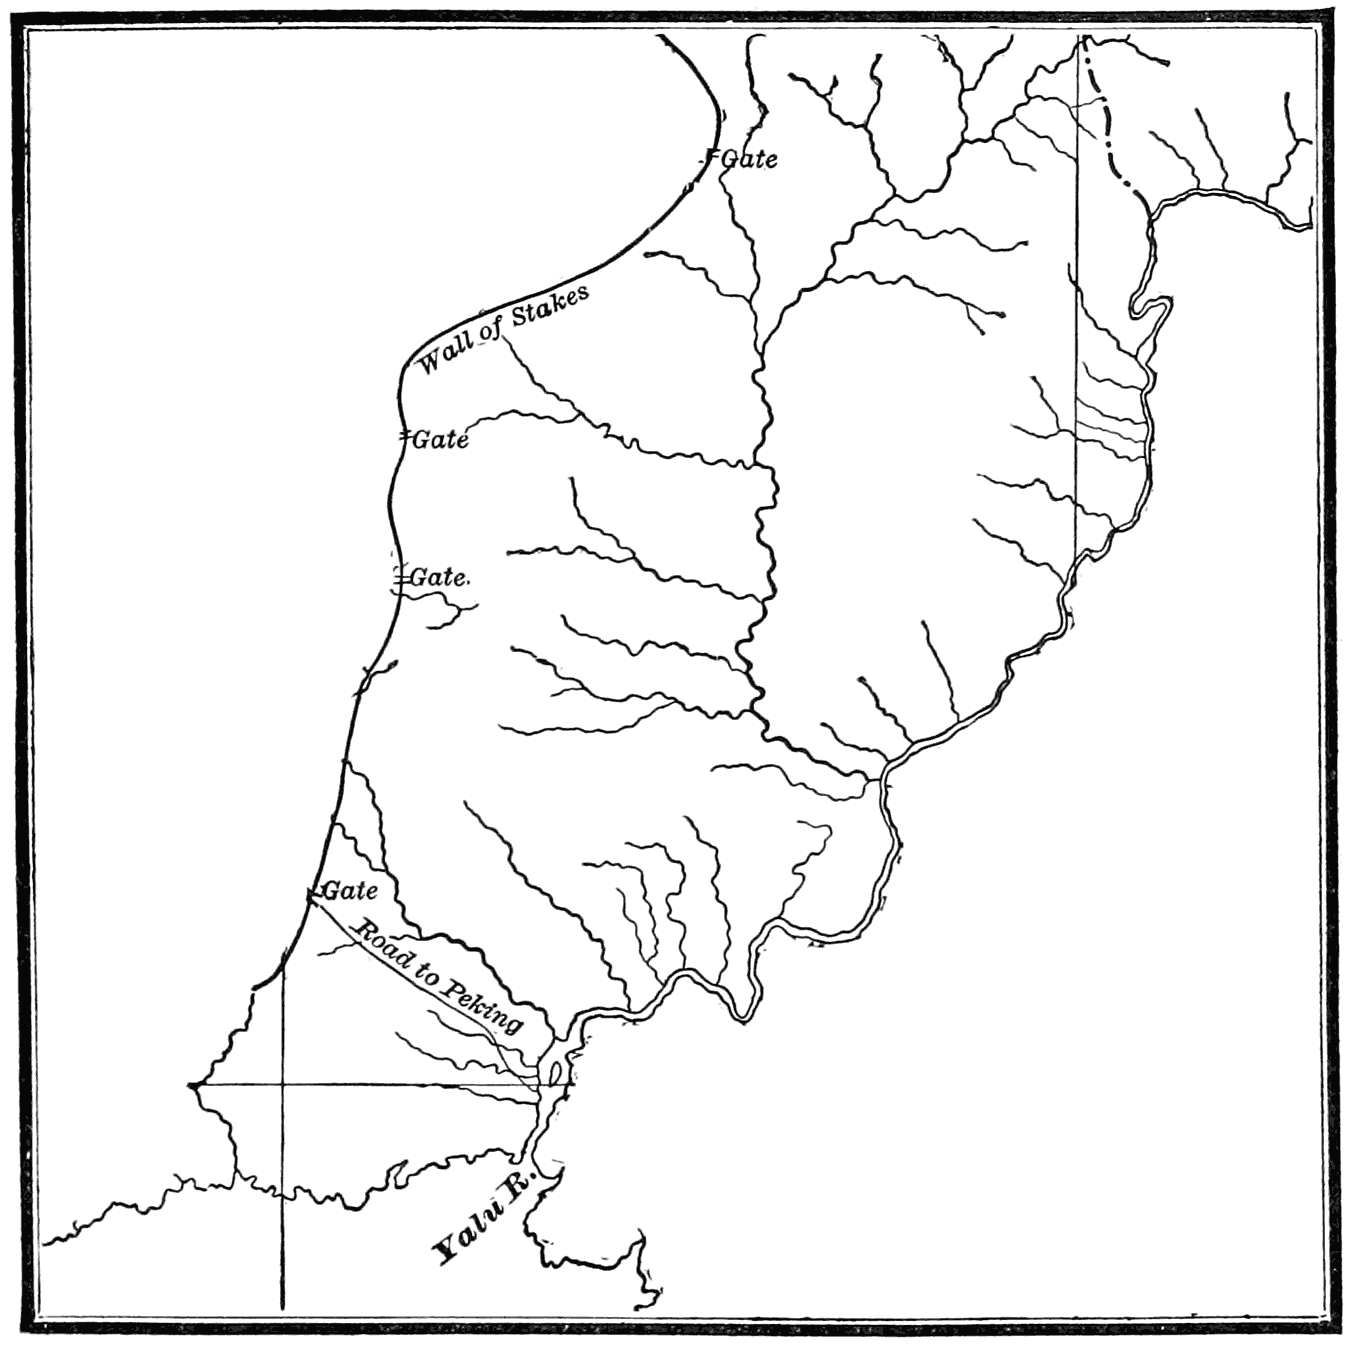 The Neutral Territory (from a Chinese Atlas).